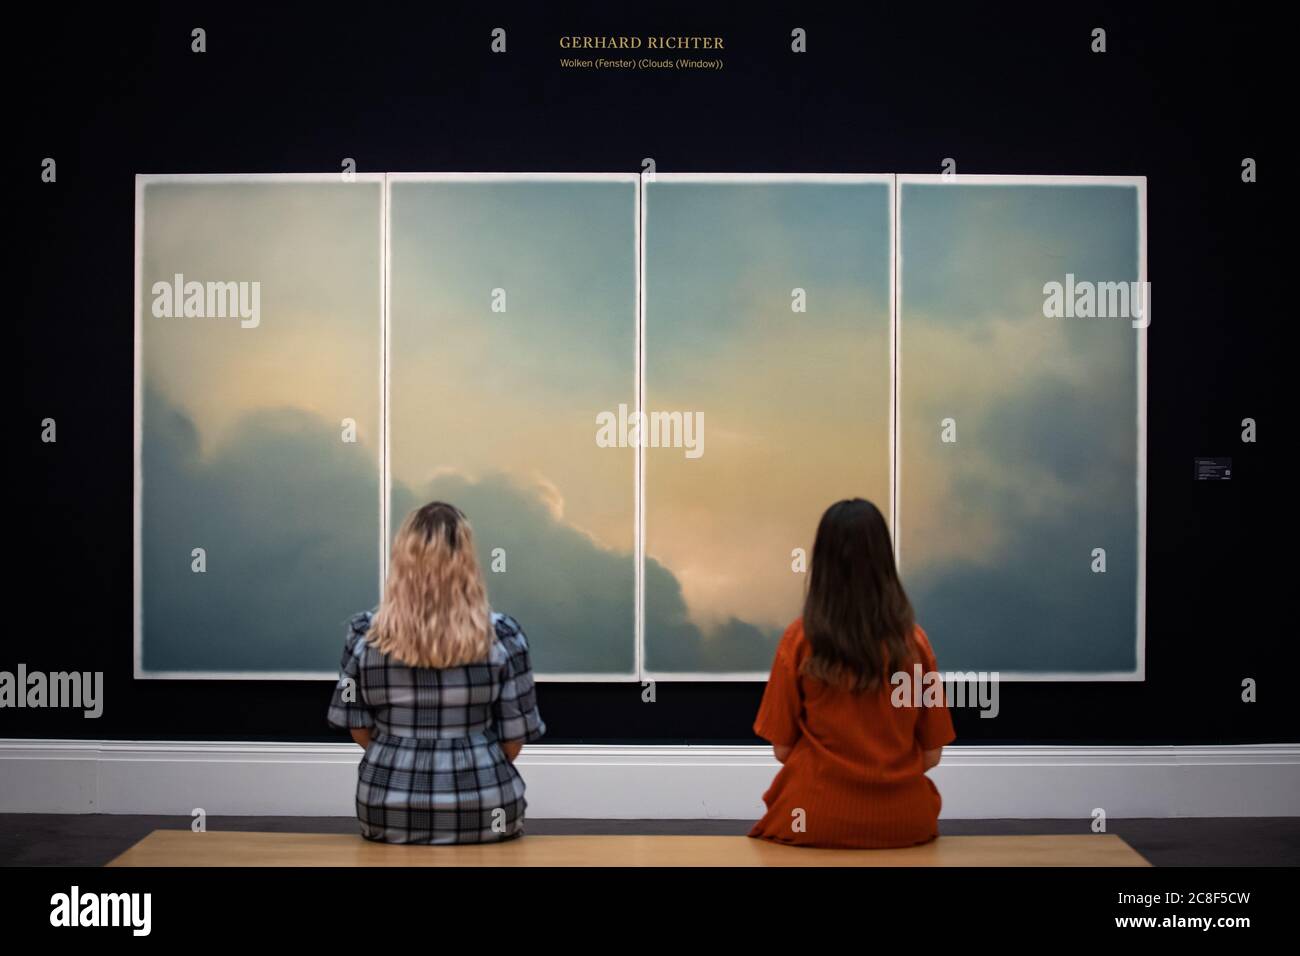 Gallery assistants in front of Wolken (fenster) (Clouds (Window)) by Gerhard Richter, 1970, oil on canvas with an estimate of GBP 9-12 million during a press preview at Sotheby's in London ahead of their 'From Rembrandt to Richter' sale on July 28. Stock Photo